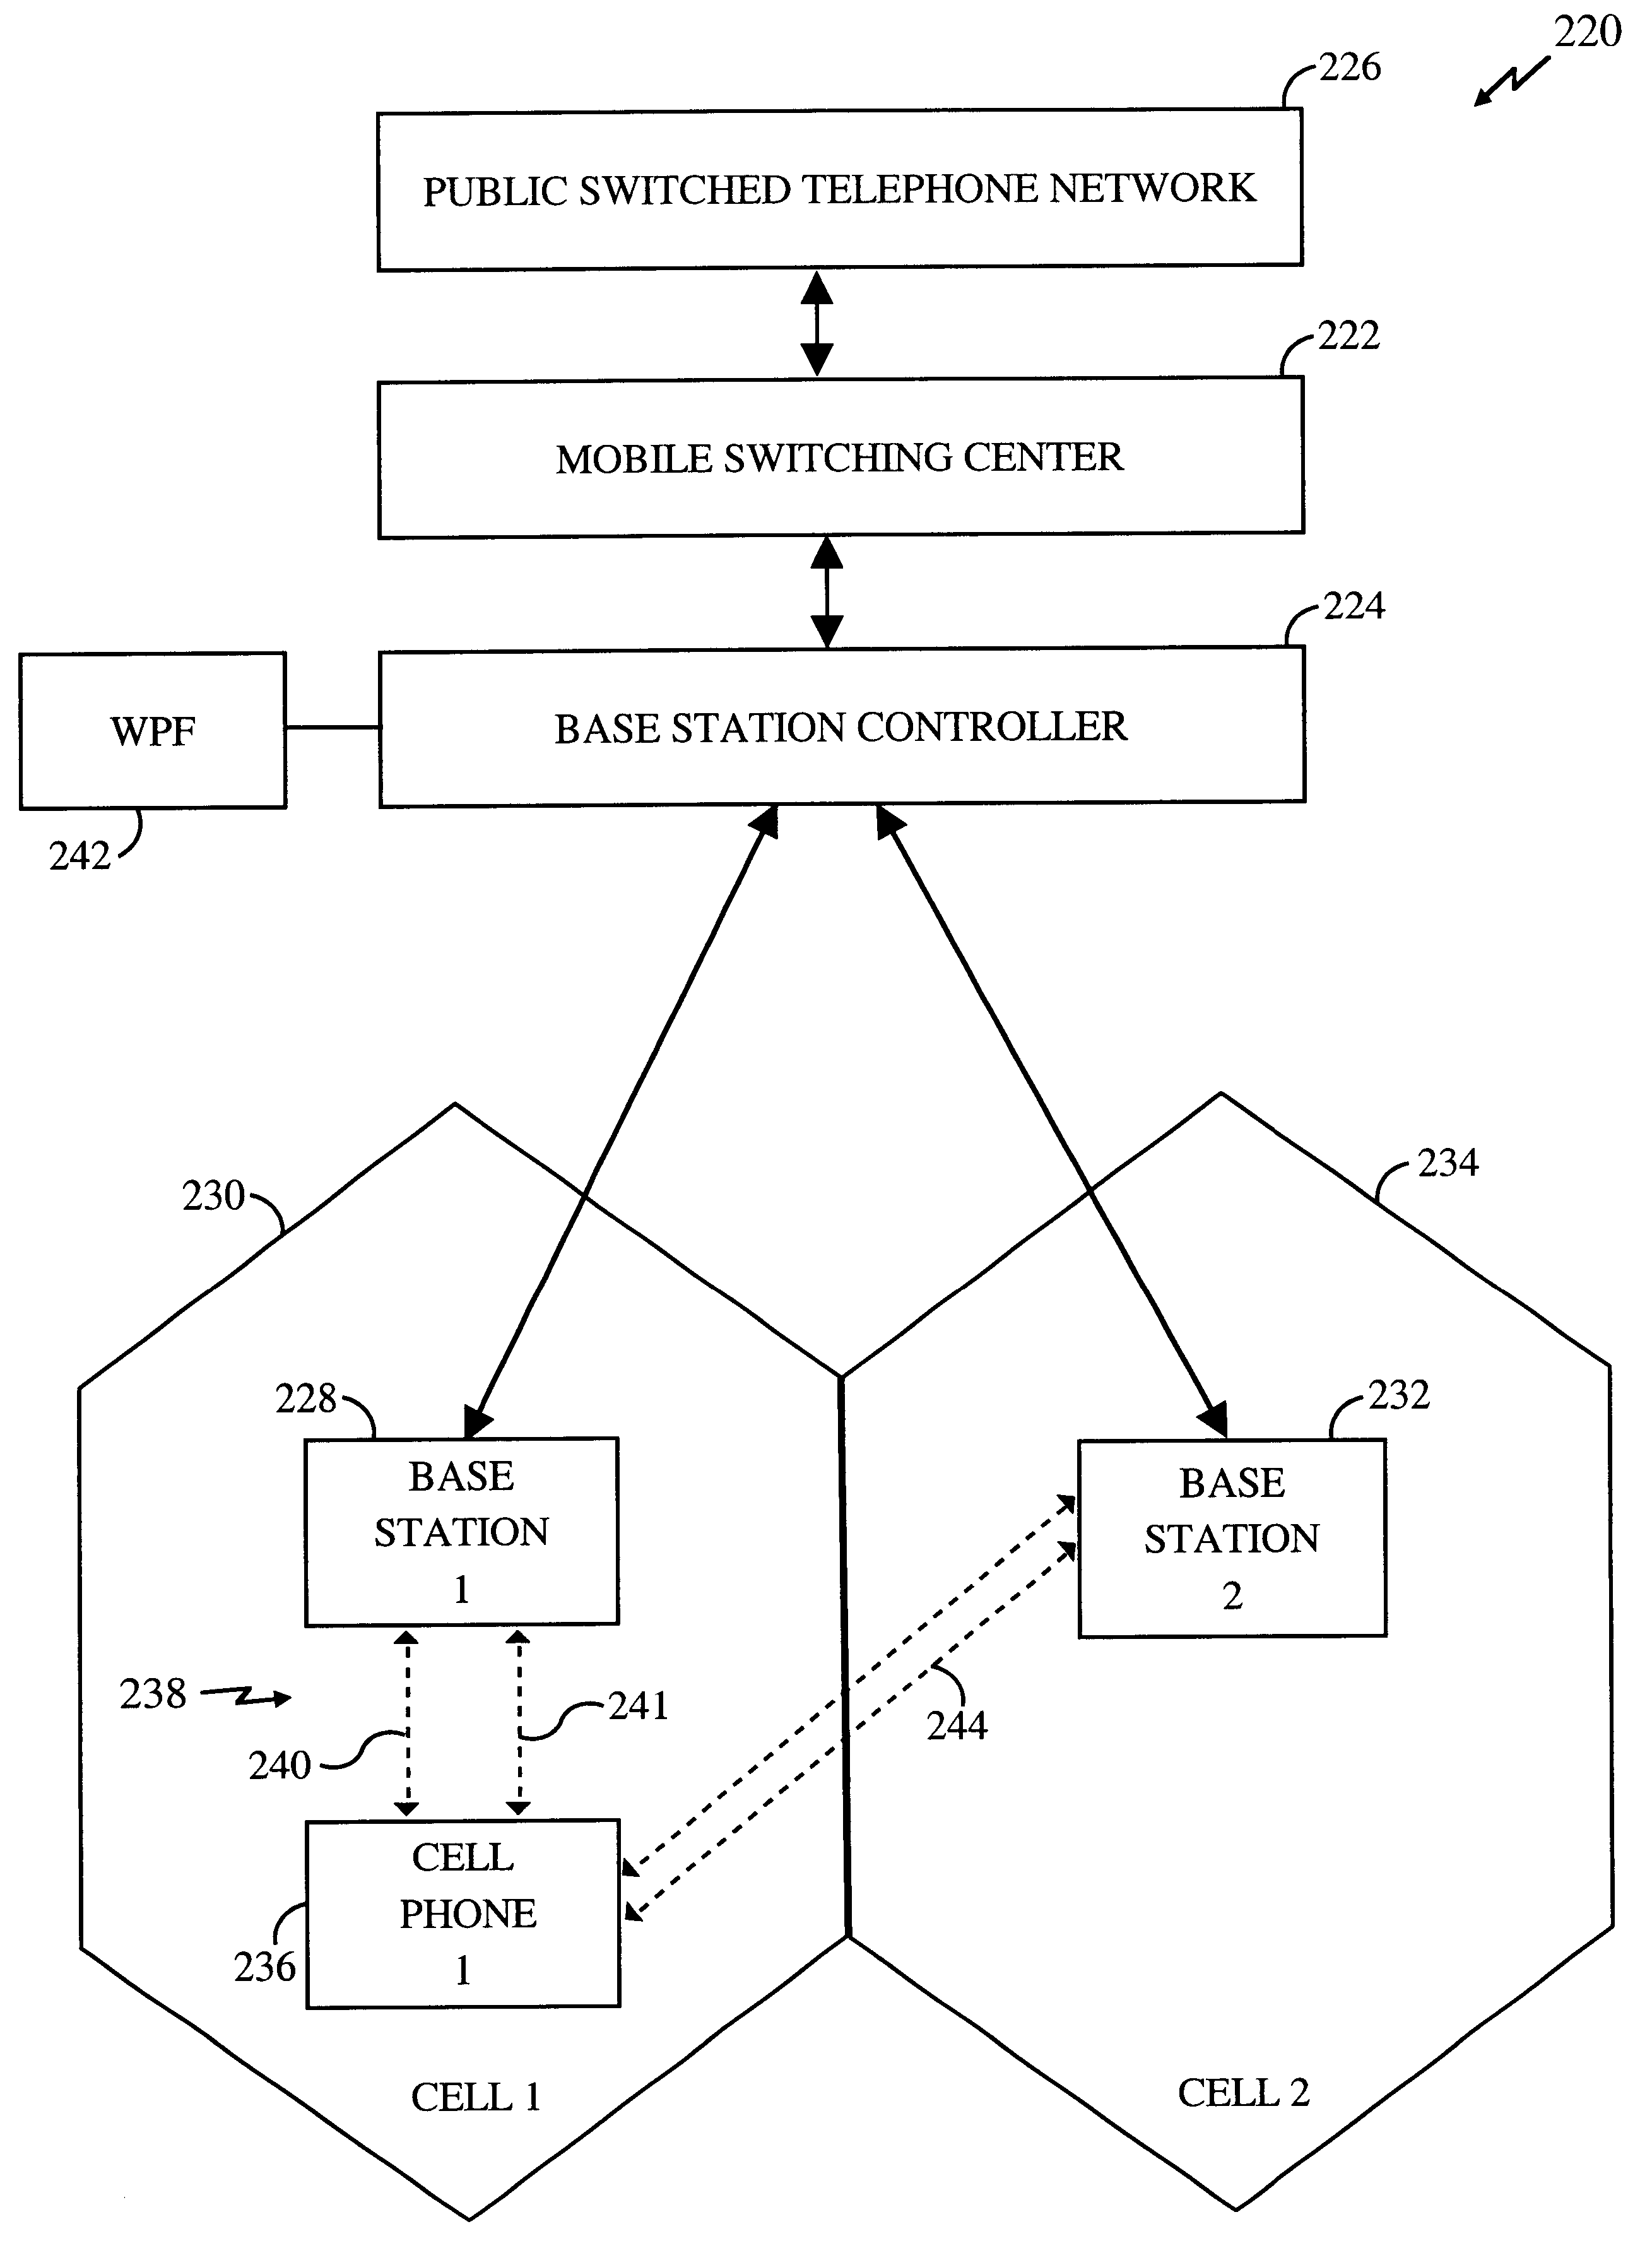 Method and apparatus for reducing pilot search times utilizing mobile station location information